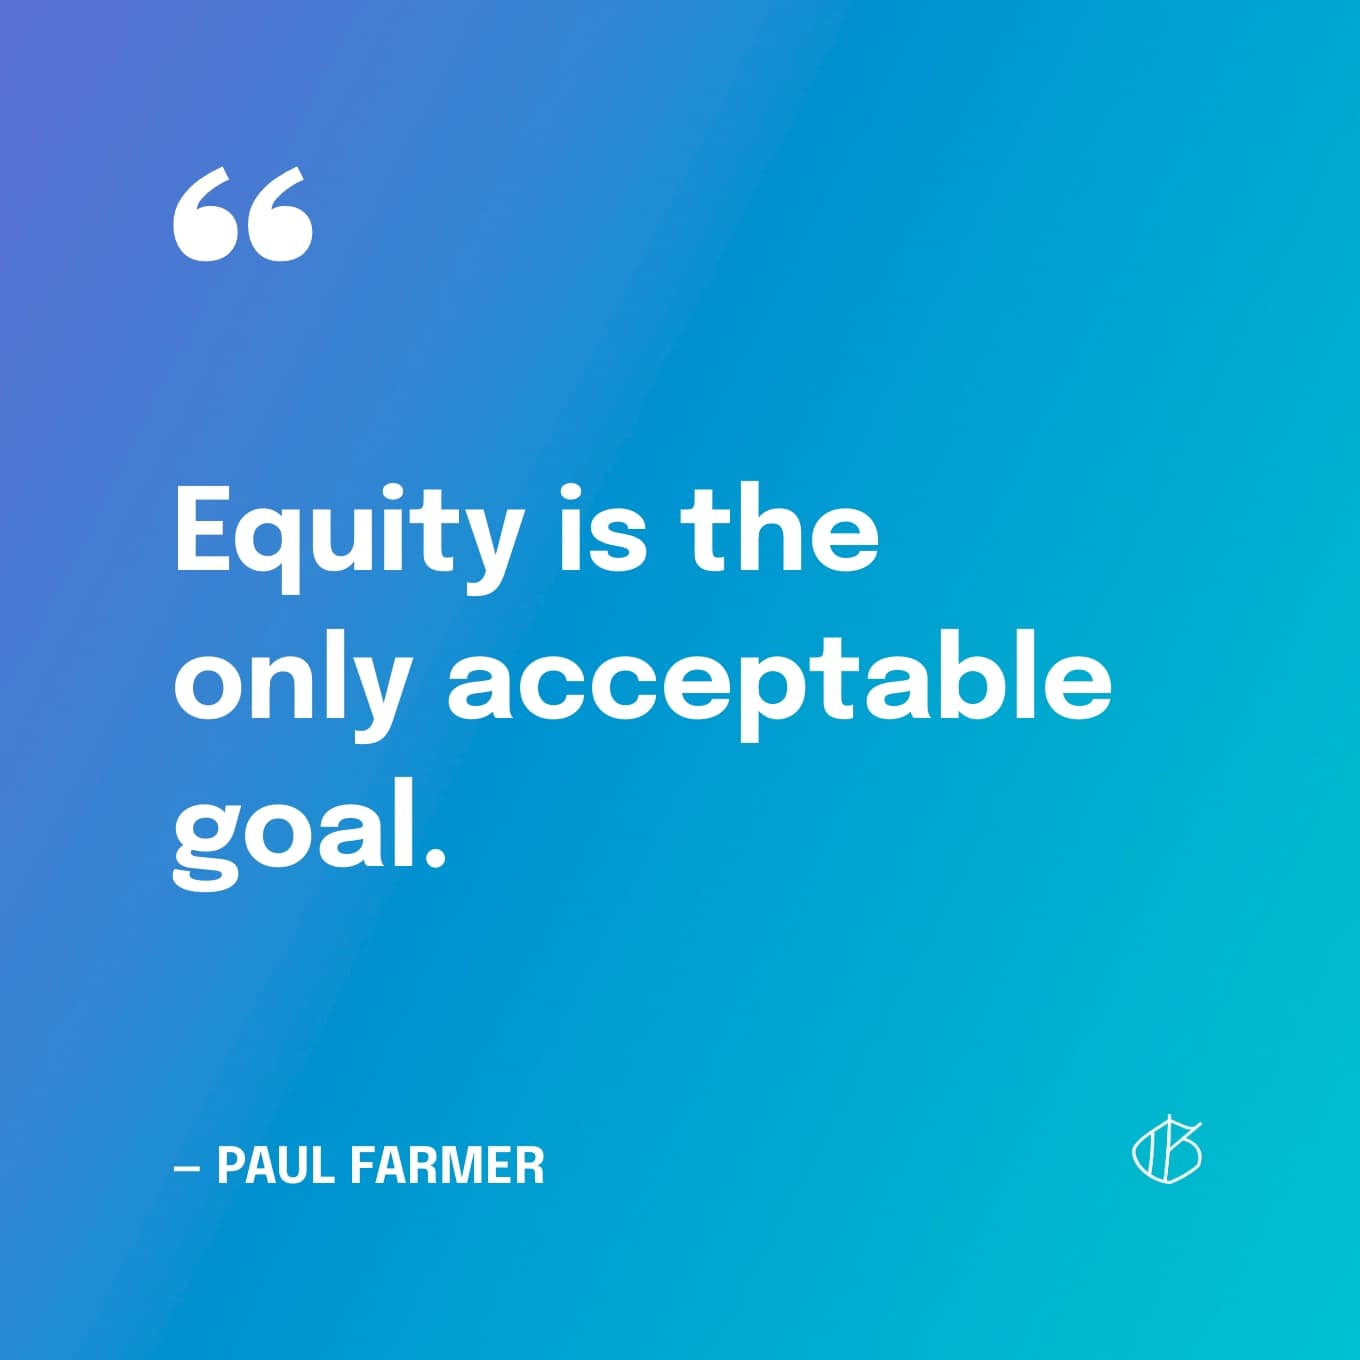 “Equity is the only acceptable goal.” — Paul Farmer